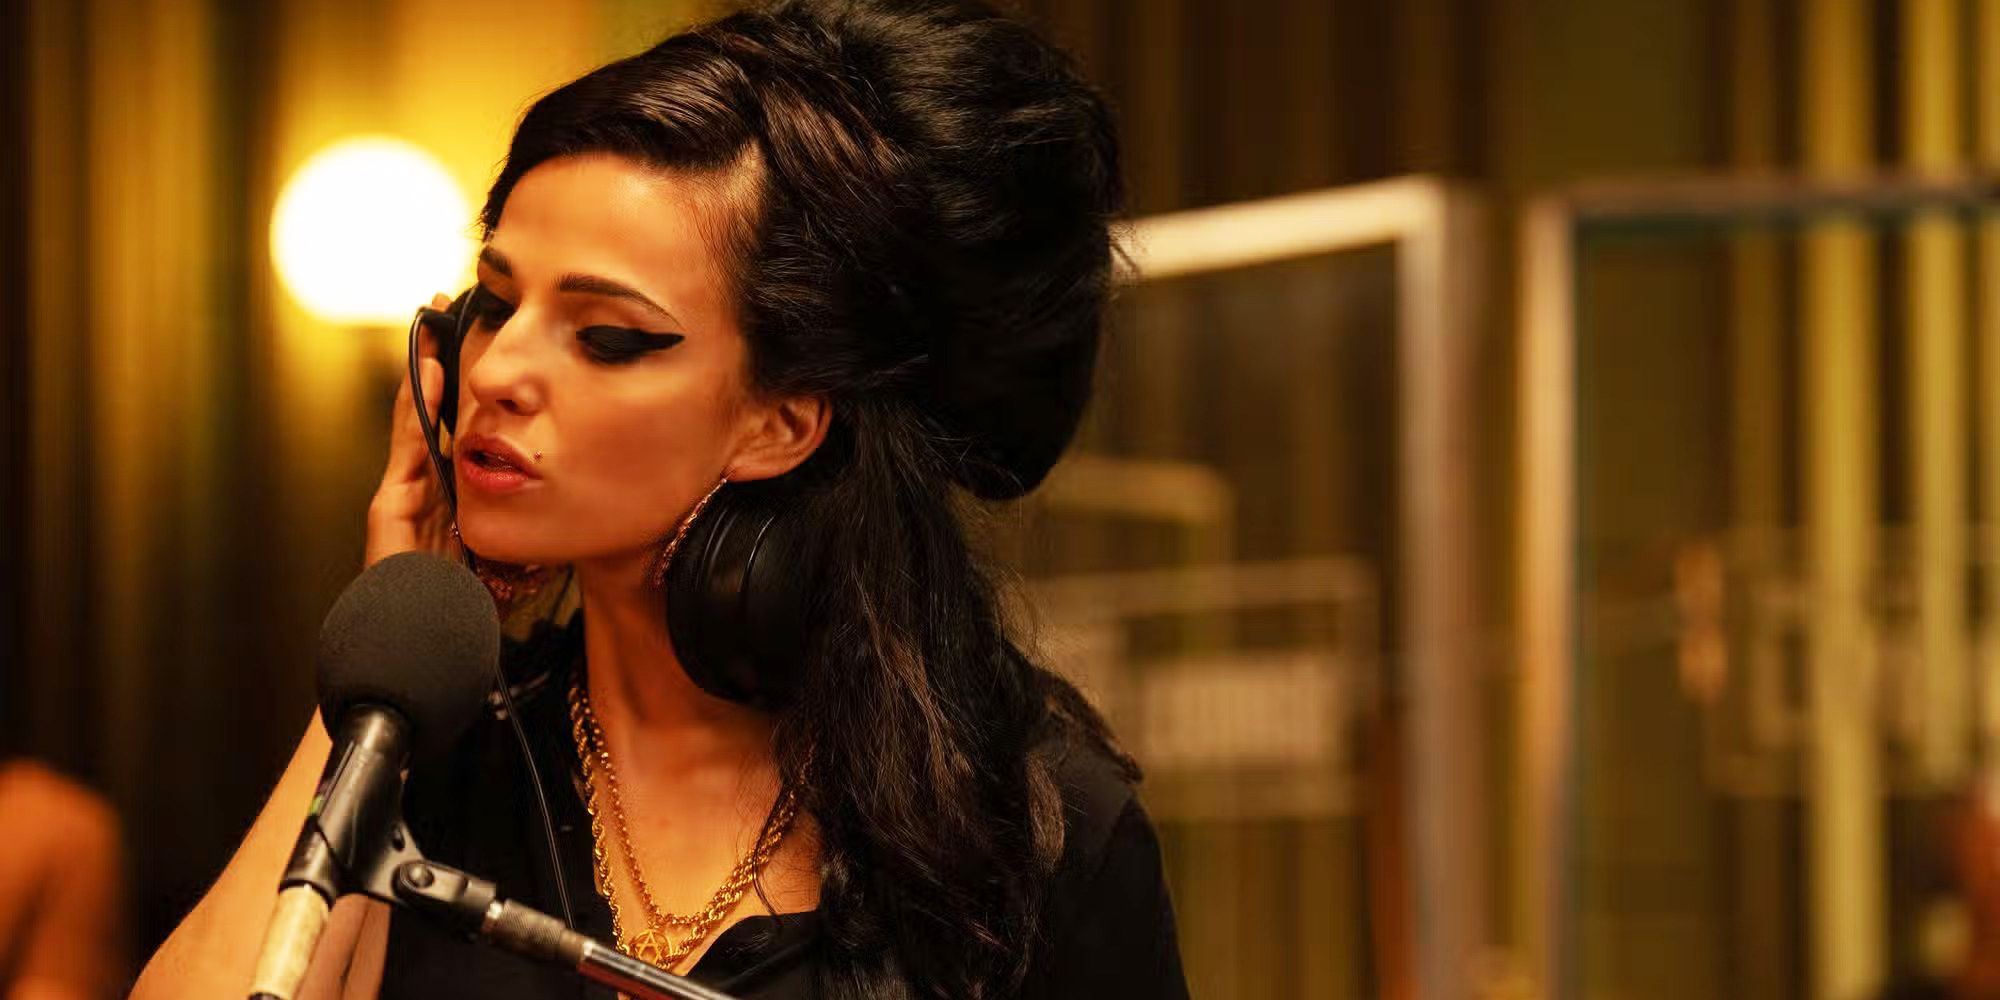 Back To Black Review: Superficial, Frustrating Biopic Never Properly Explores Amy Winehouse